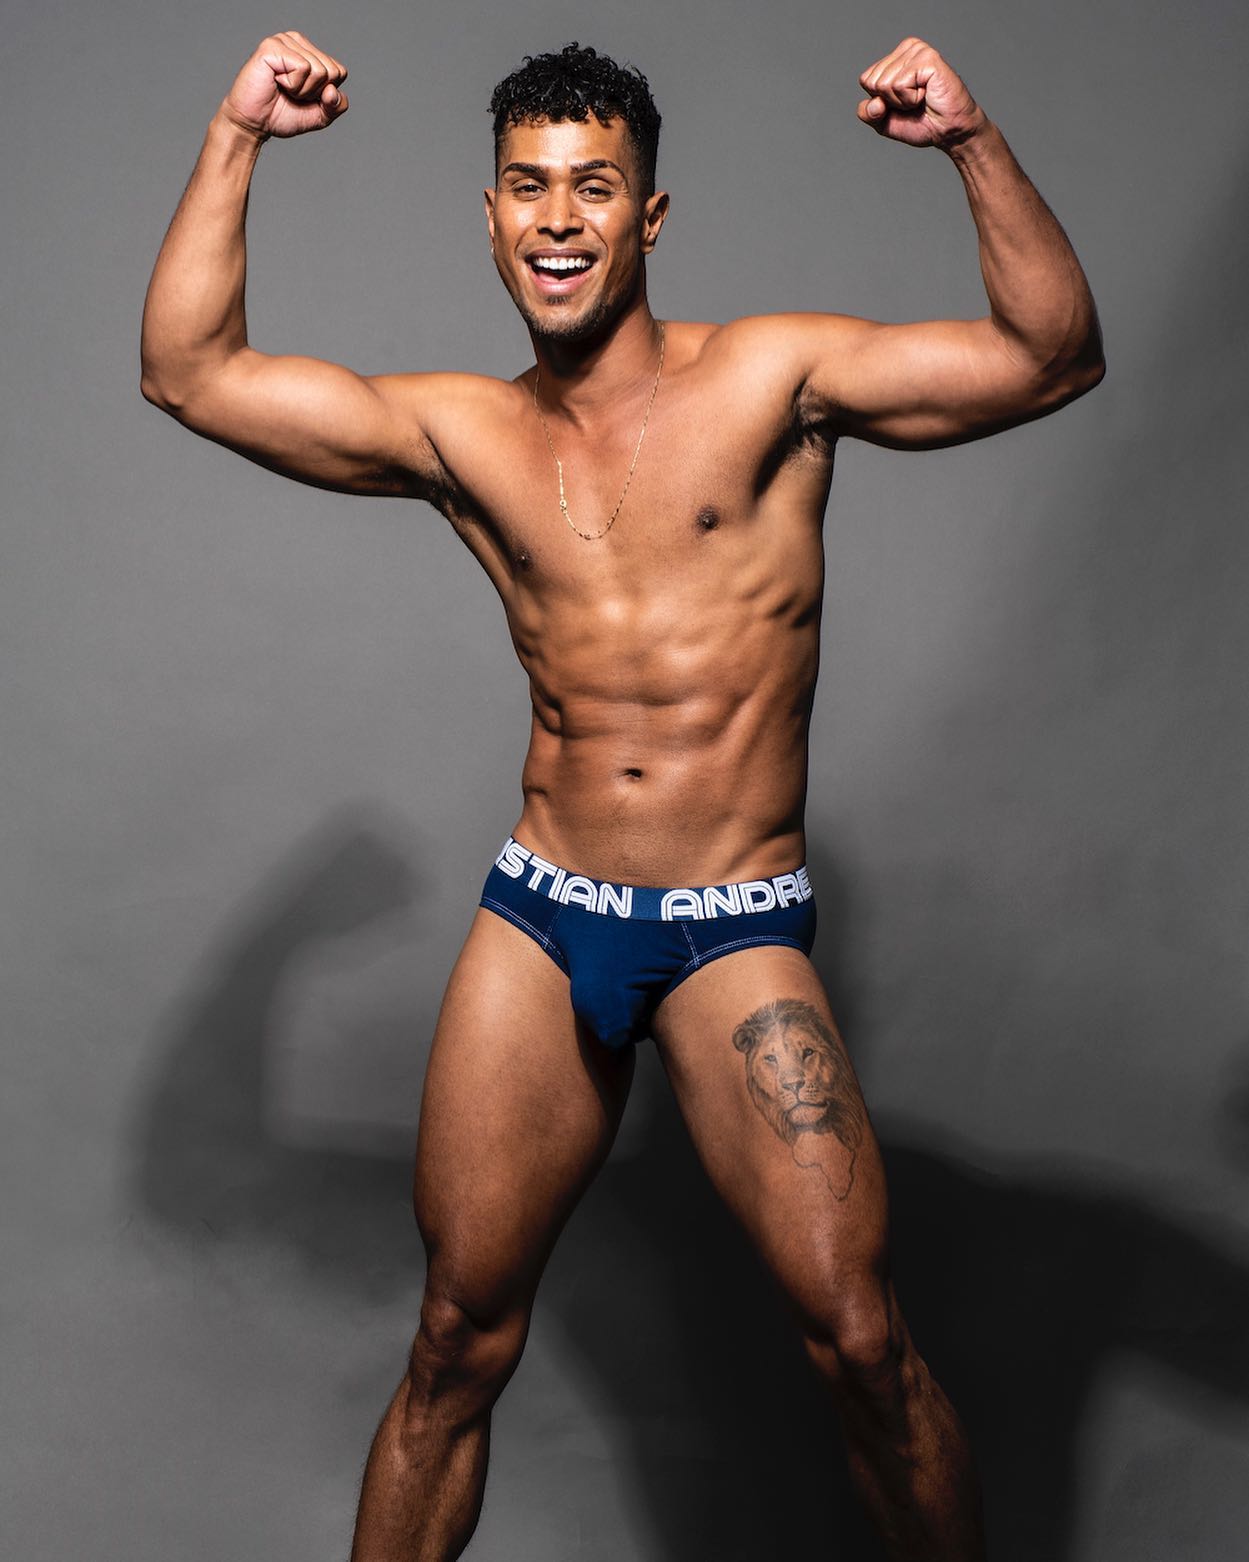 The comfortable Almost Naked Bamboo Brief of Andrew Christian will keep you cool when things start to get hot! The luxurious fabric is extra absorbent, perfect for everyday wear. Try it now:
____
https://menandunderwear.com/shop/underwear/andrew-christian-almost-naked-bamboo-brief-navy-2